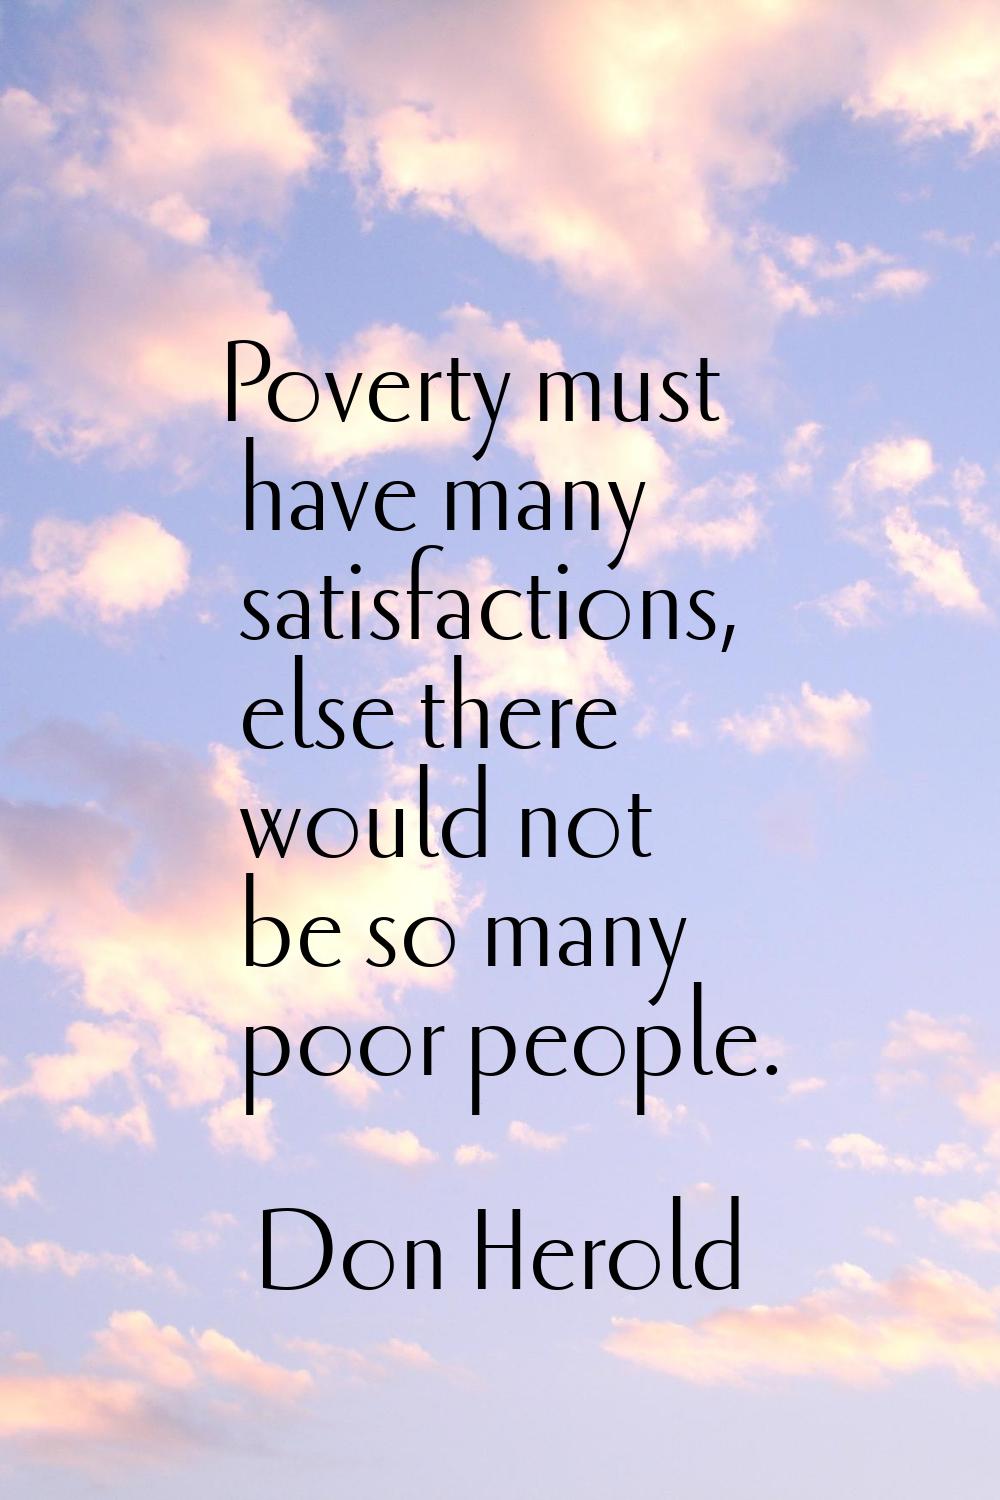 Poverty must have many satisfactions, else there would not be so many poor people.